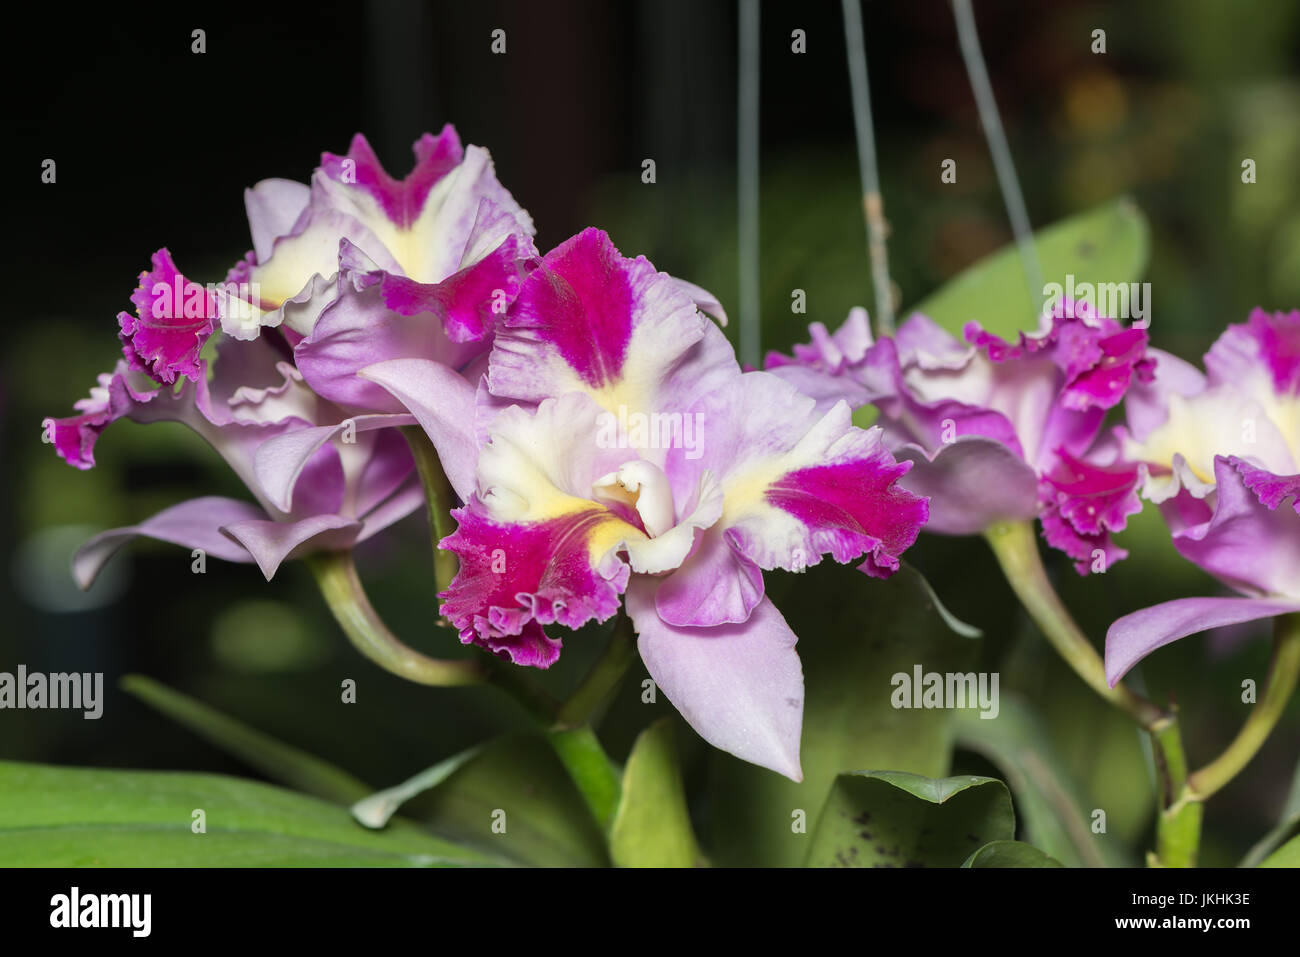 Hybrid pink cattleya orchid flower on nature background Stock Photo